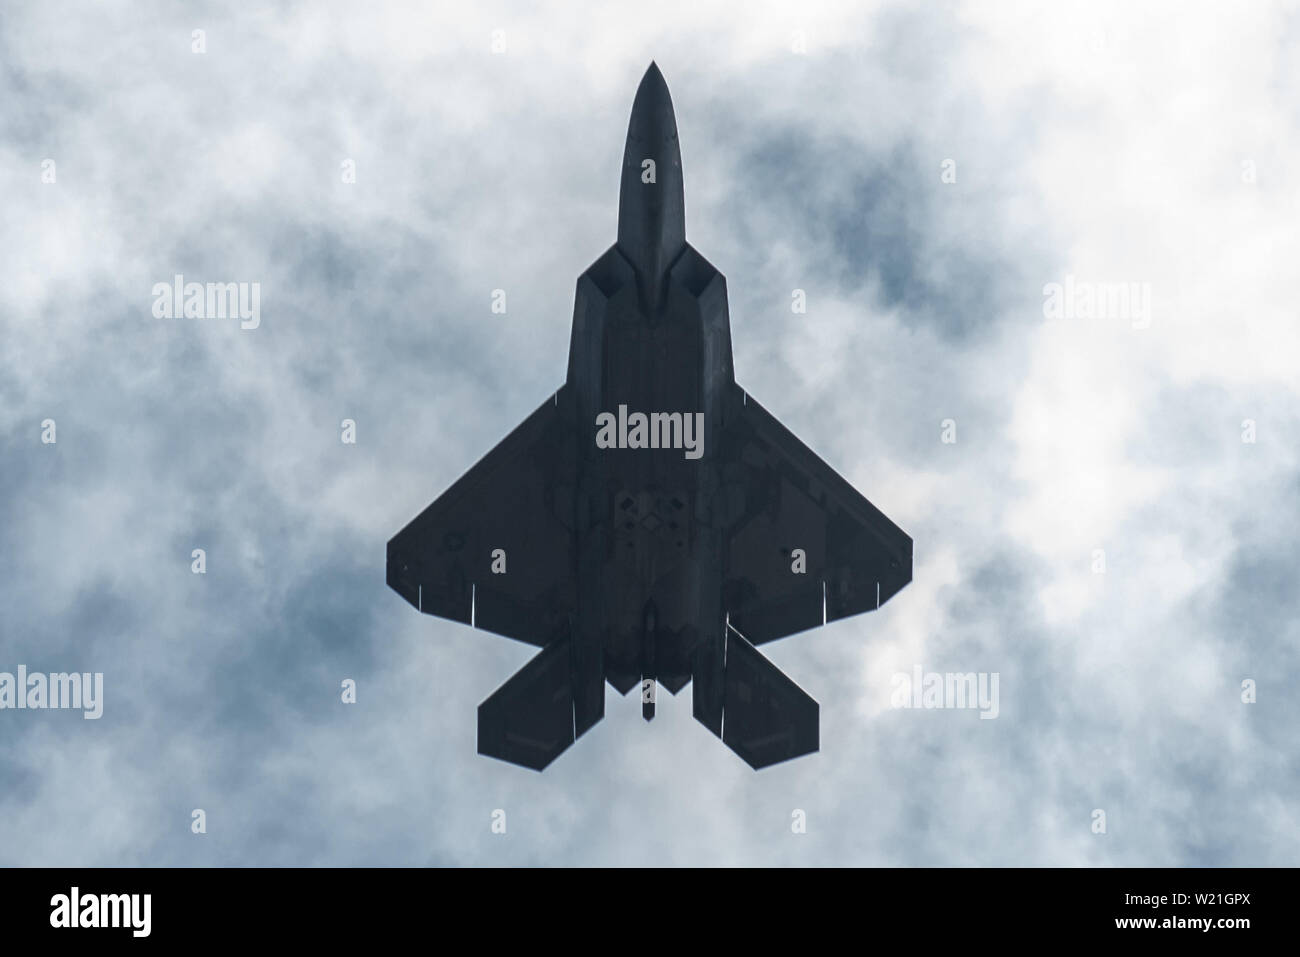 The F-22 Raptor flies over Traverse City, Mich. during the National Cherry Festival June 29, 2019. Representing the U.S. Air Force and Air Combat Command, the F-22 Demo Team travels to 25 air shows a season to showcase the performance and capabilities of the world's premier 5th-generation fighter. (U.S. Air Force photo by 2nd Lt. Samuel Eckholm) Stock Photo